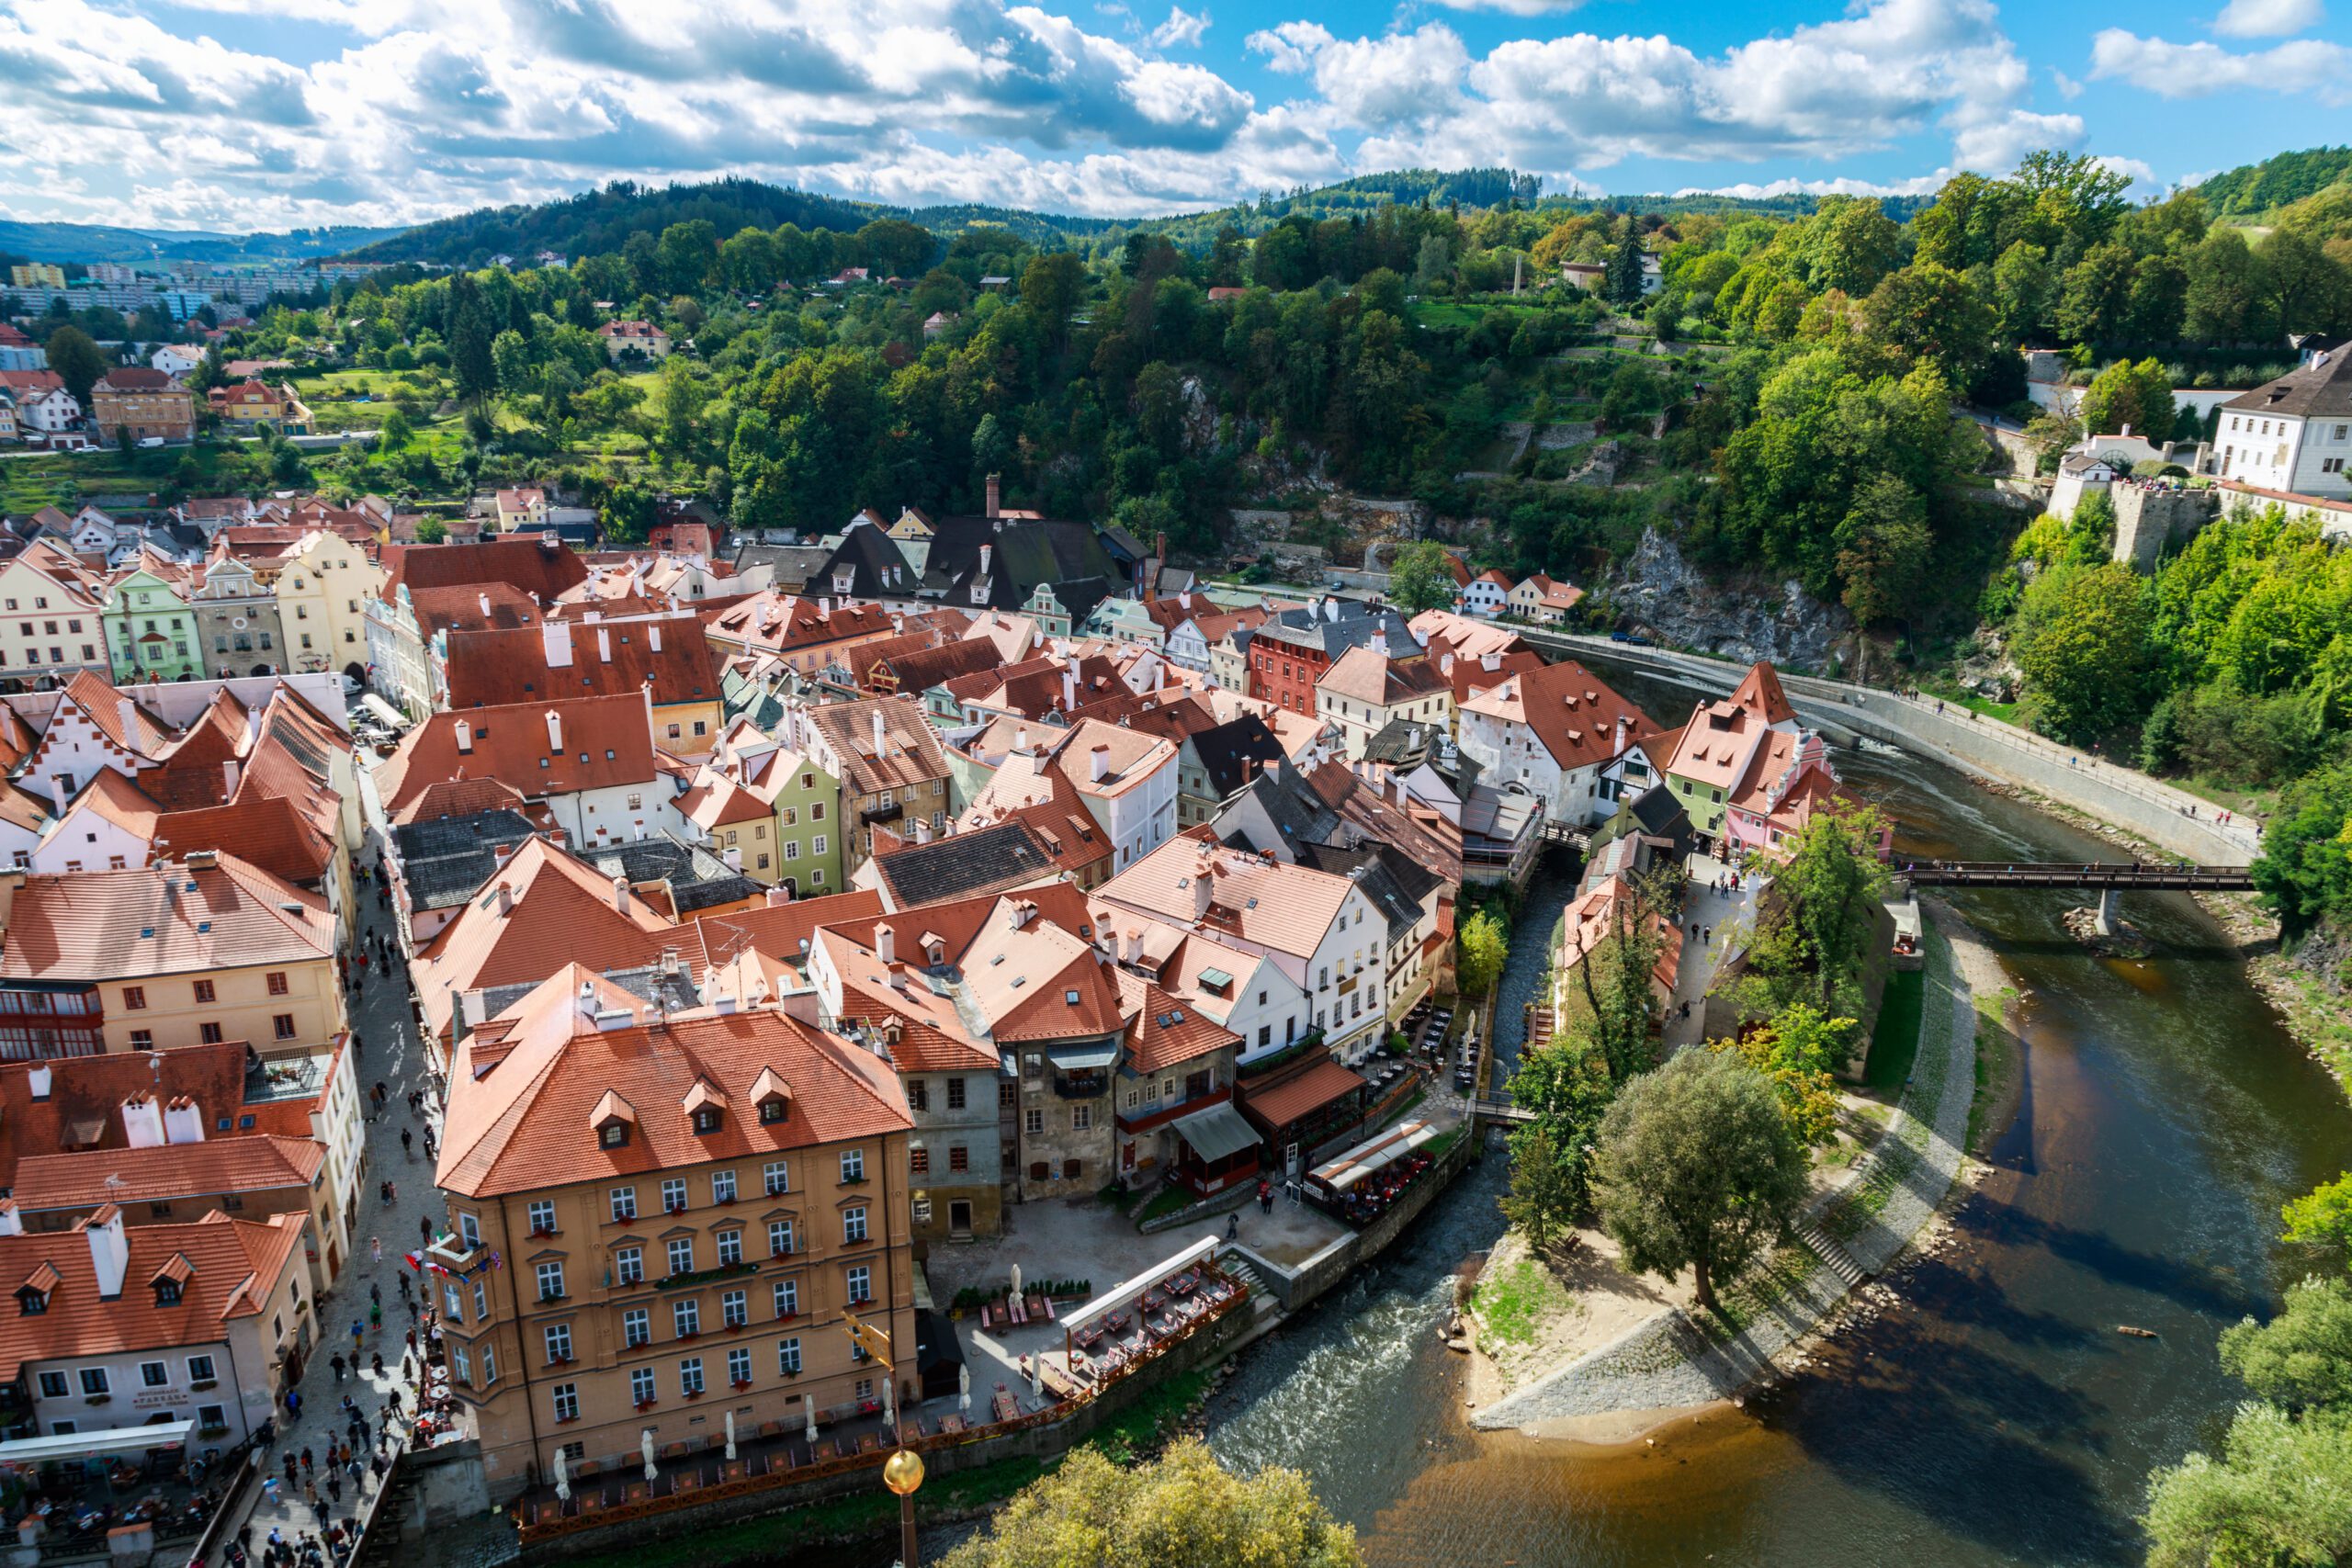 Breathtaking  view of Cesky Krumlov city in the South Bohemia region of the Czech Republic, Europe